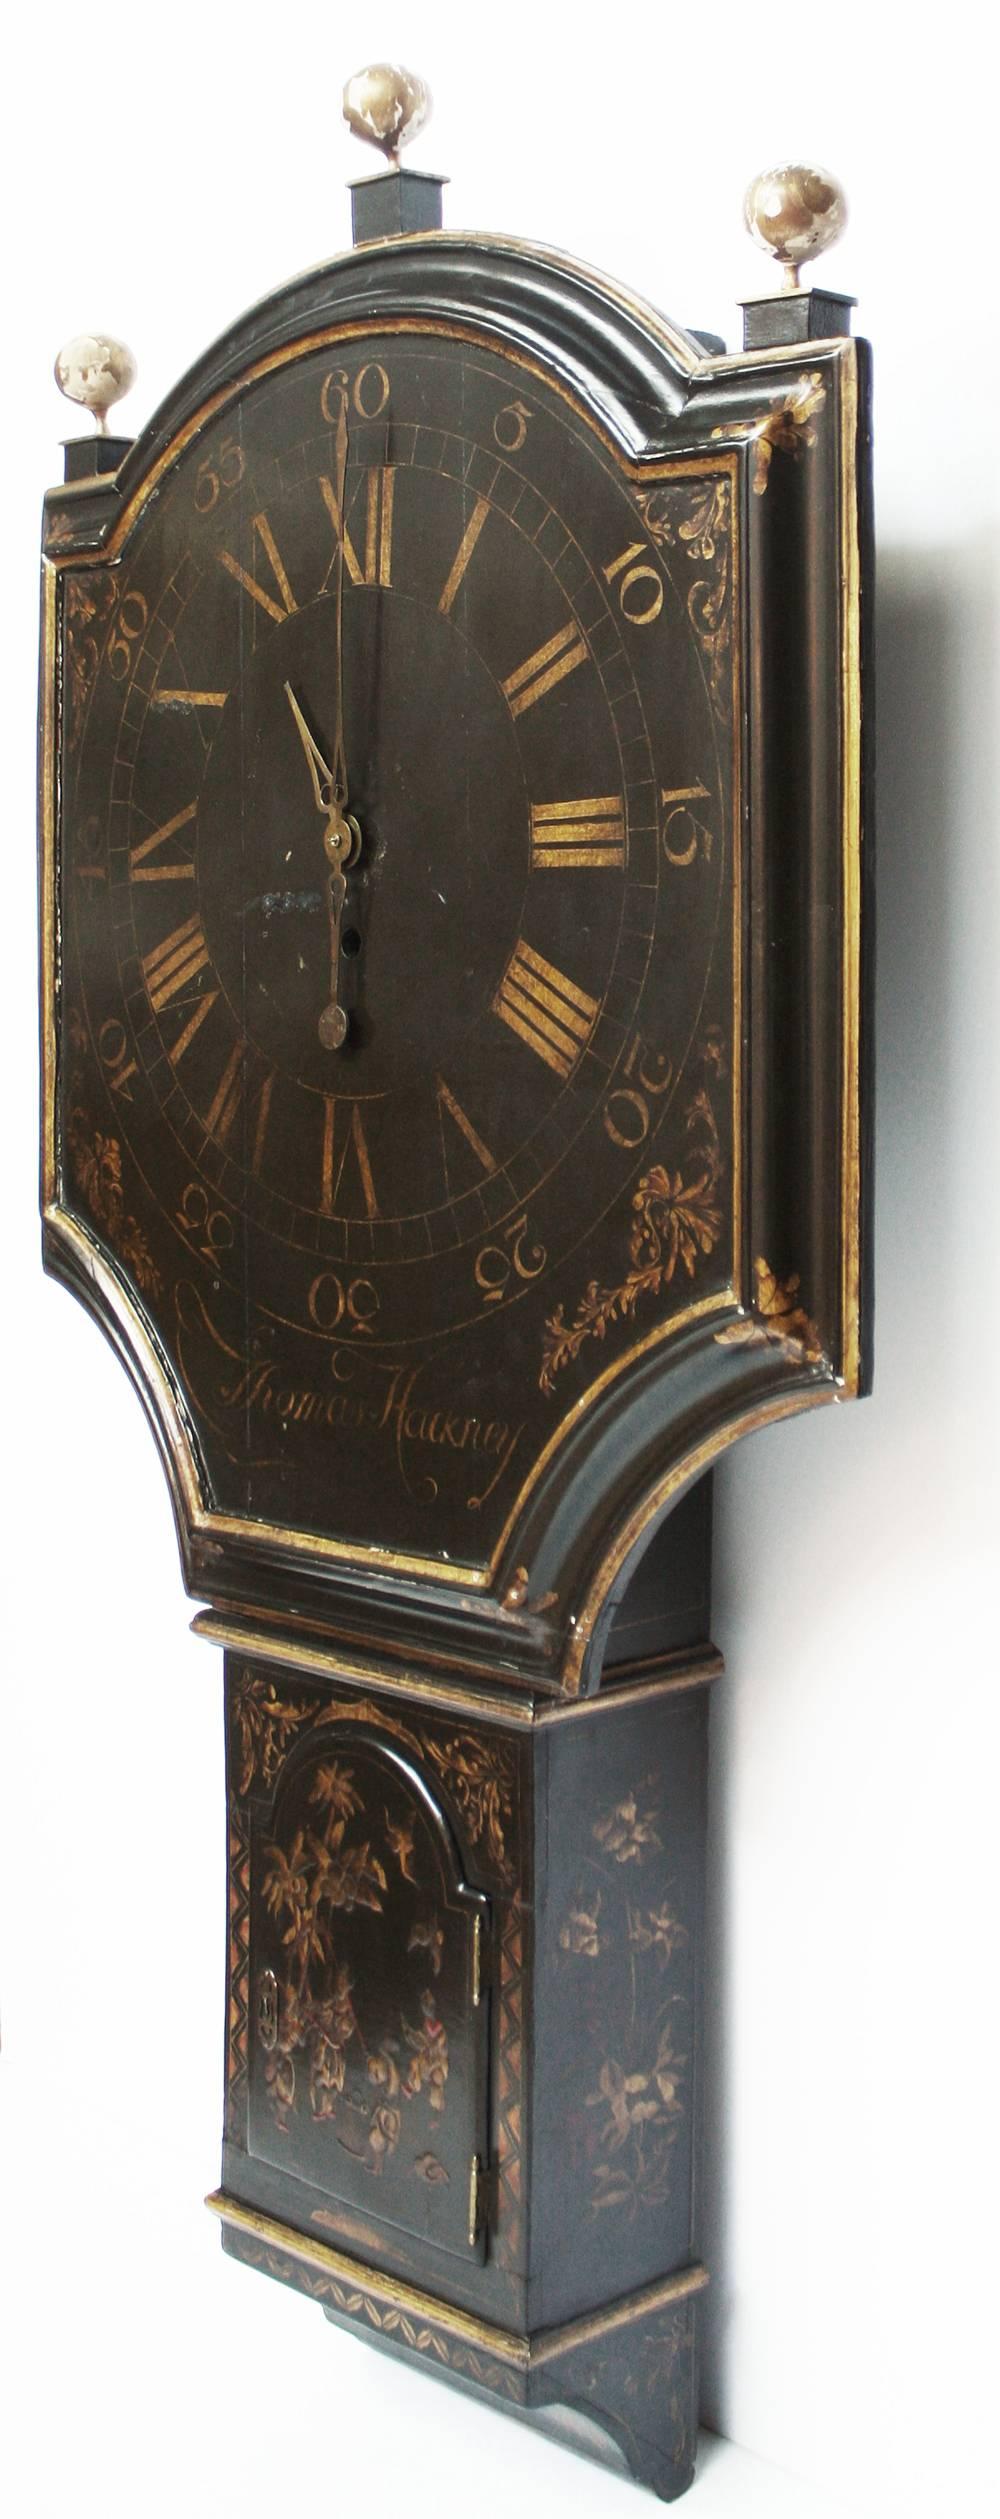 Gilt Act of Parliament Clock Case / George II Japanned by Thomas Hackney